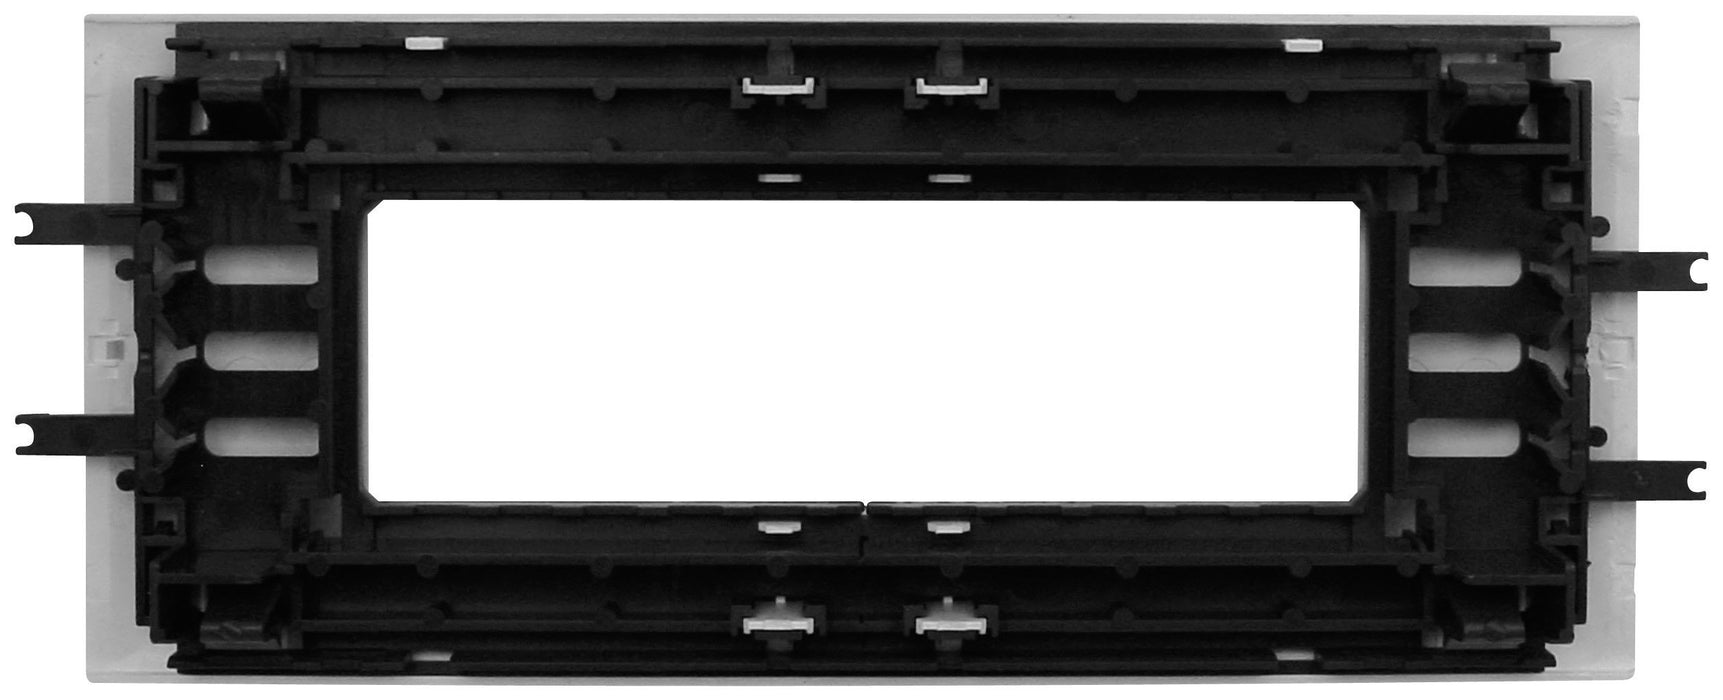 Legrand 6 Module Arteor Mosaic Frame For 85Mm Cover Dlp Plastic Trunking System. 10961